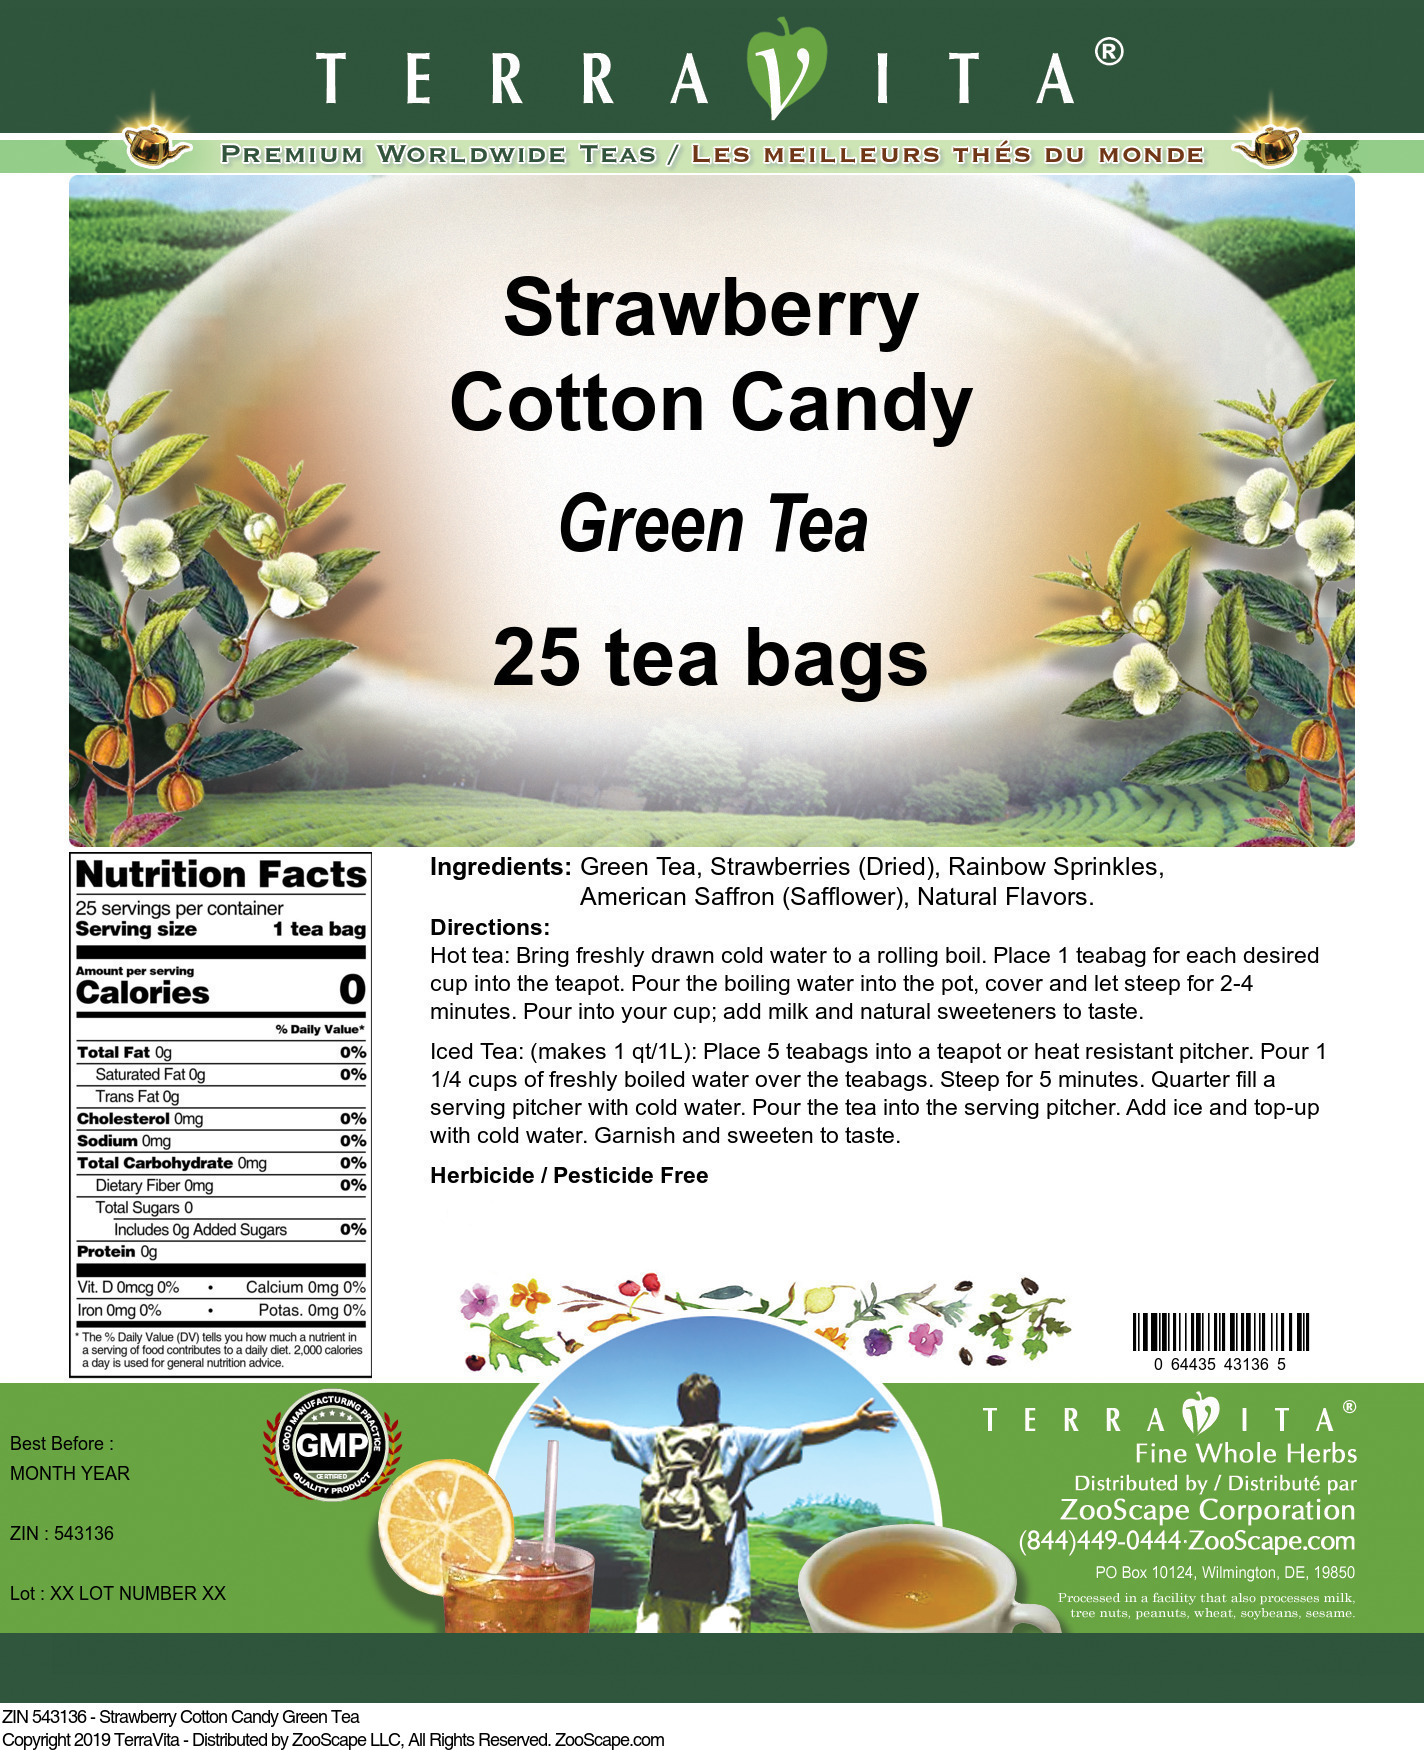 Strawberry Cotton Candy Green Tea - Label